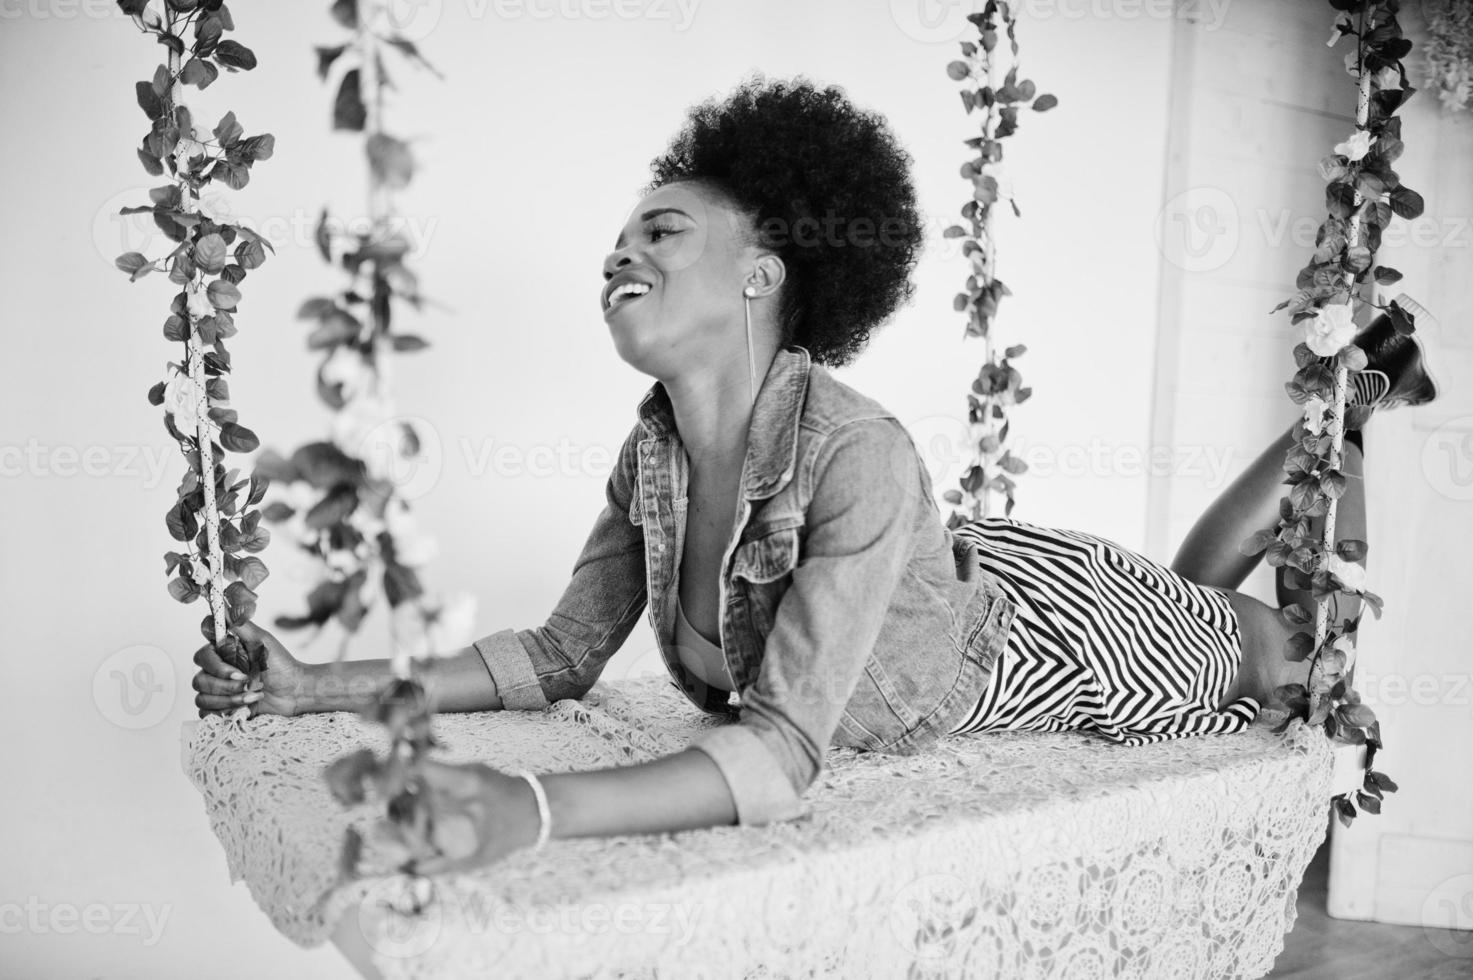 Attractive african american woman with afro hair wear on skirt and jeans jacket, posed at white room on swing. Fashionable black model. photo